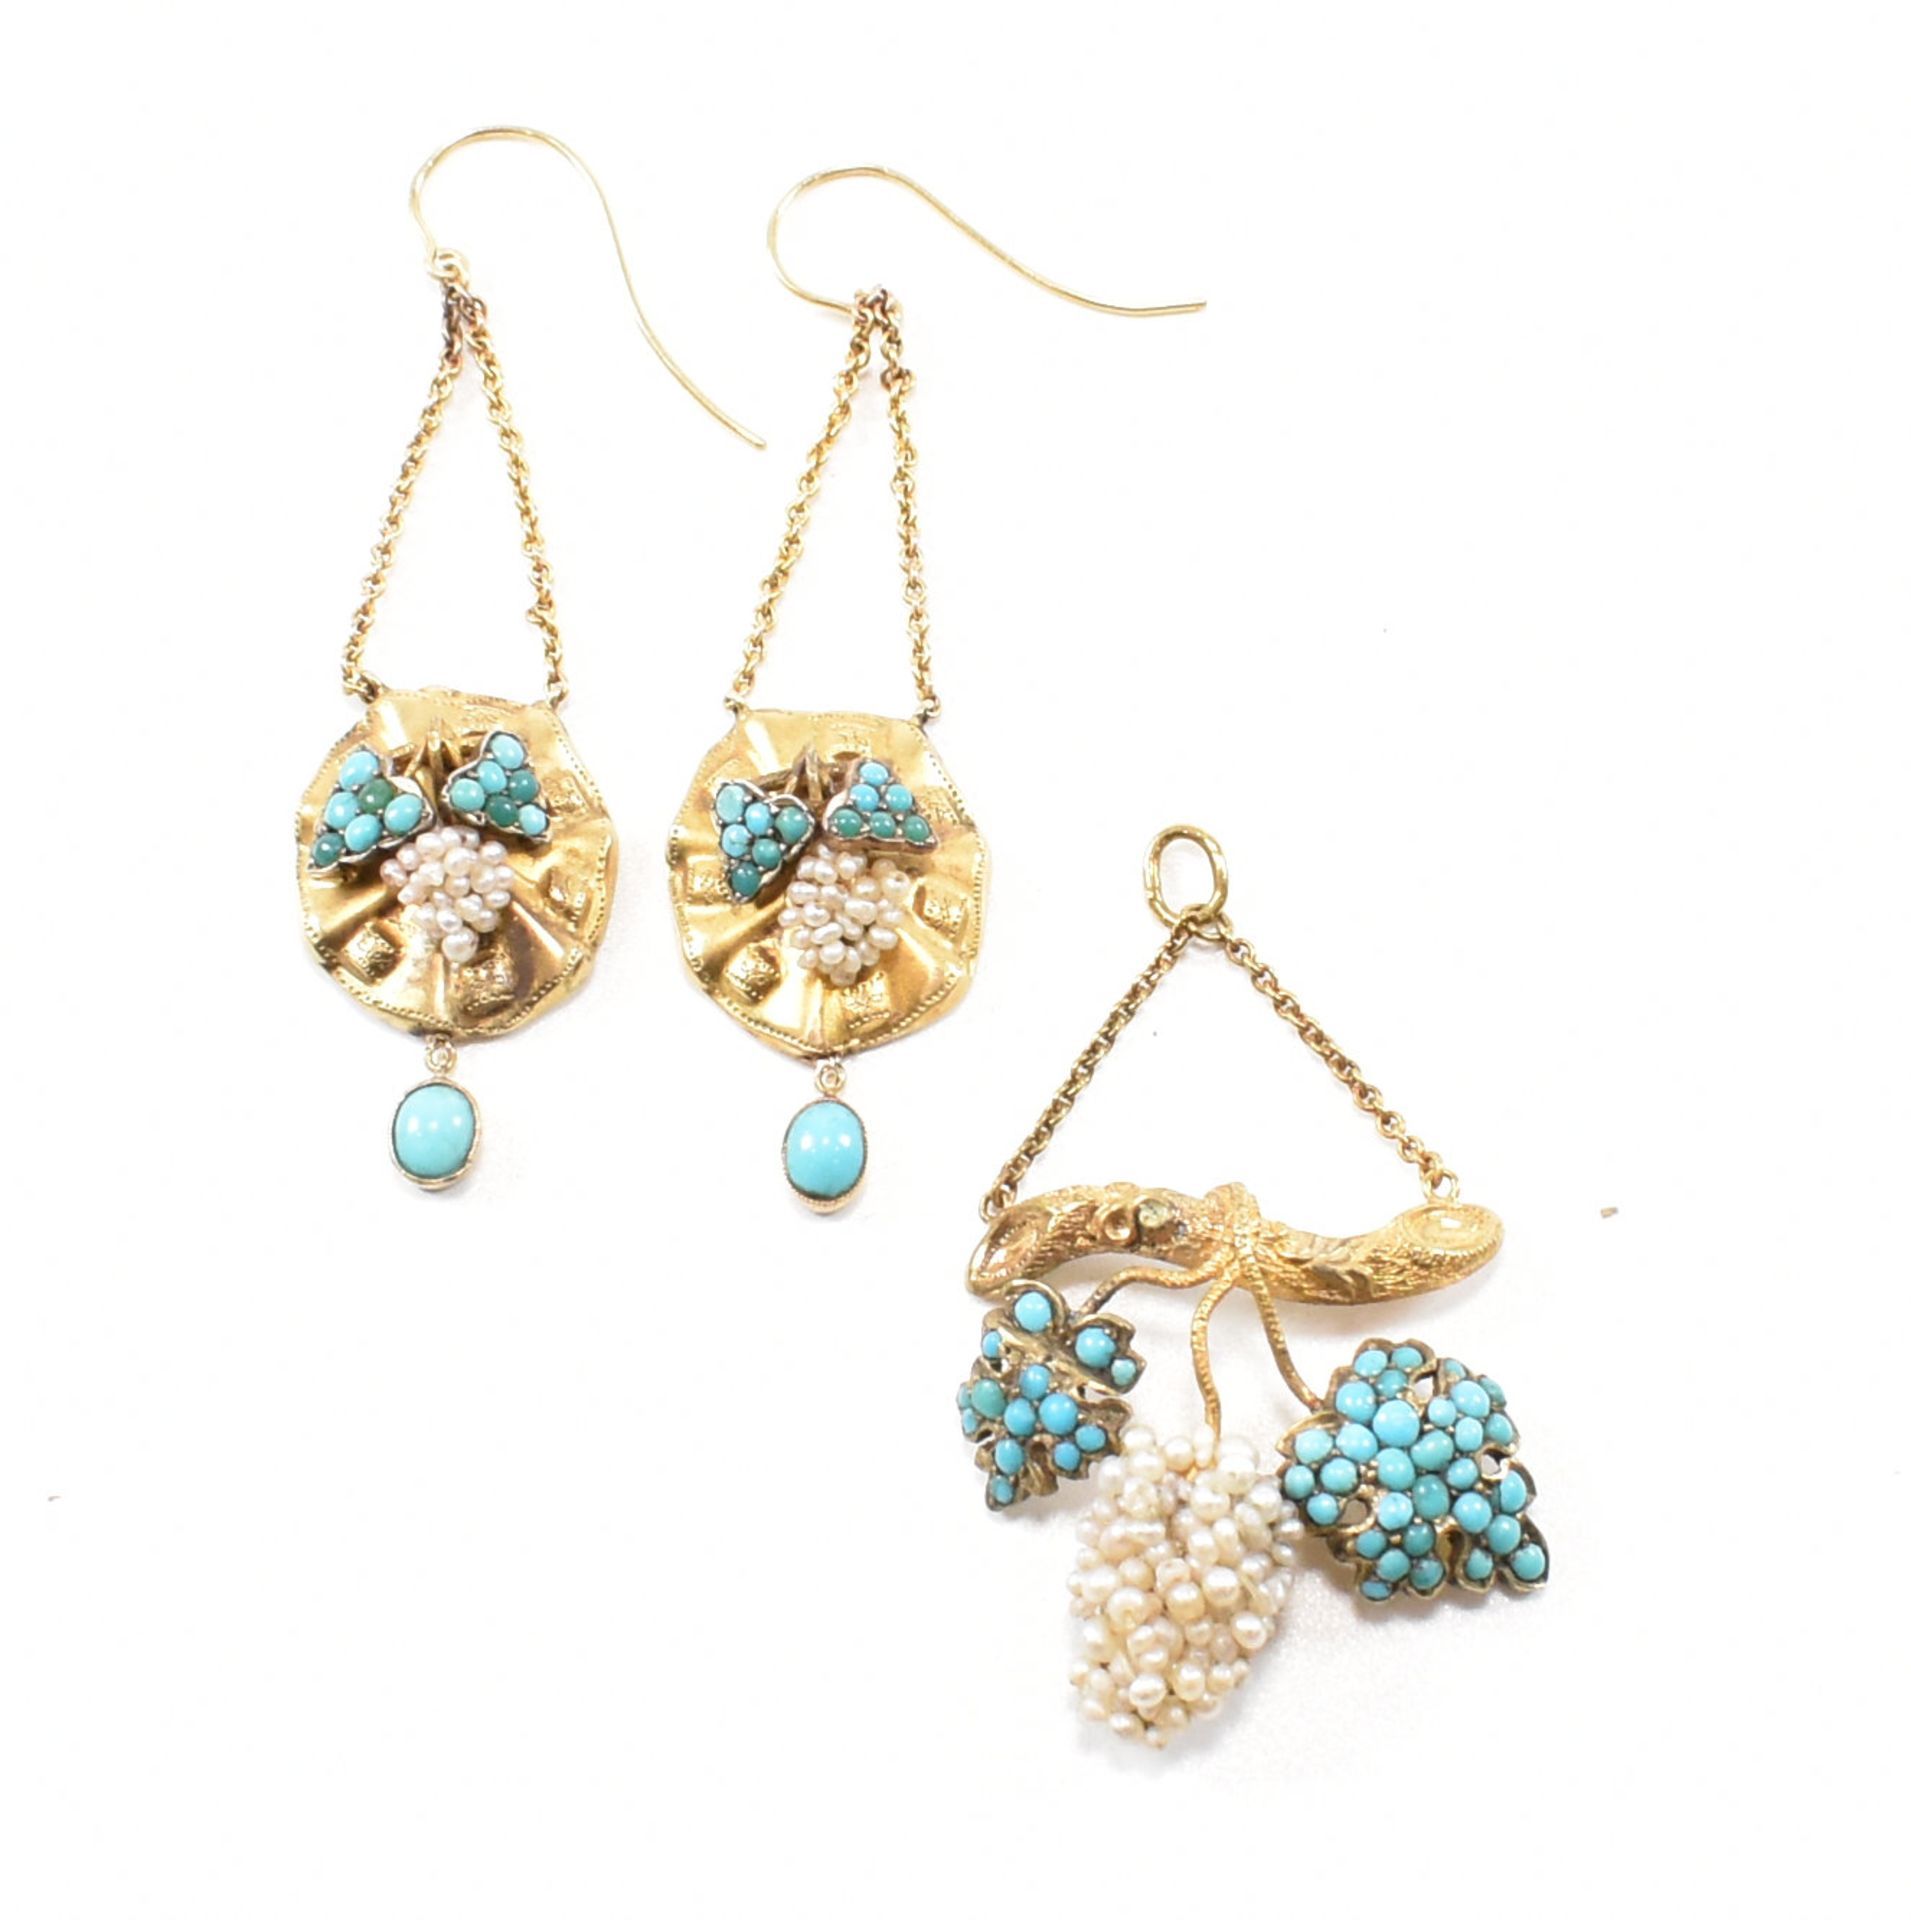 VICTORIAN TURQUOISE & SEED PEARL EARRING & PENDANT DEMI PARURE - Image 5 of 7